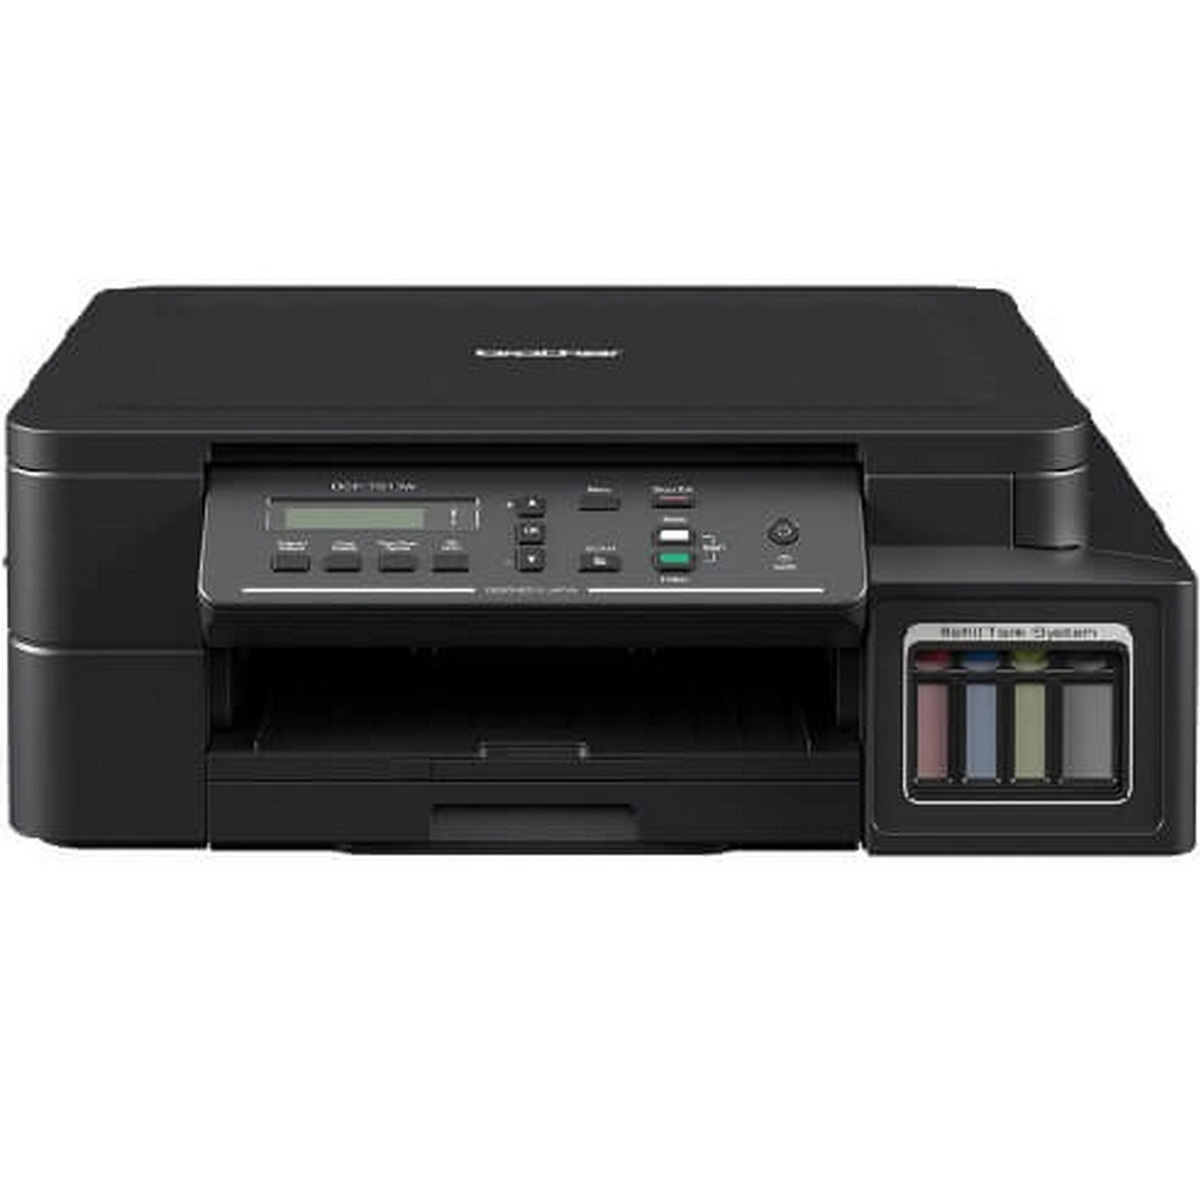 Мфу струйный brother inkbenefit plus. Brother DCP-t510w. Brother DCP-t310. Принтер brother DCP струйный. МФУ brother dcpt710wr1.